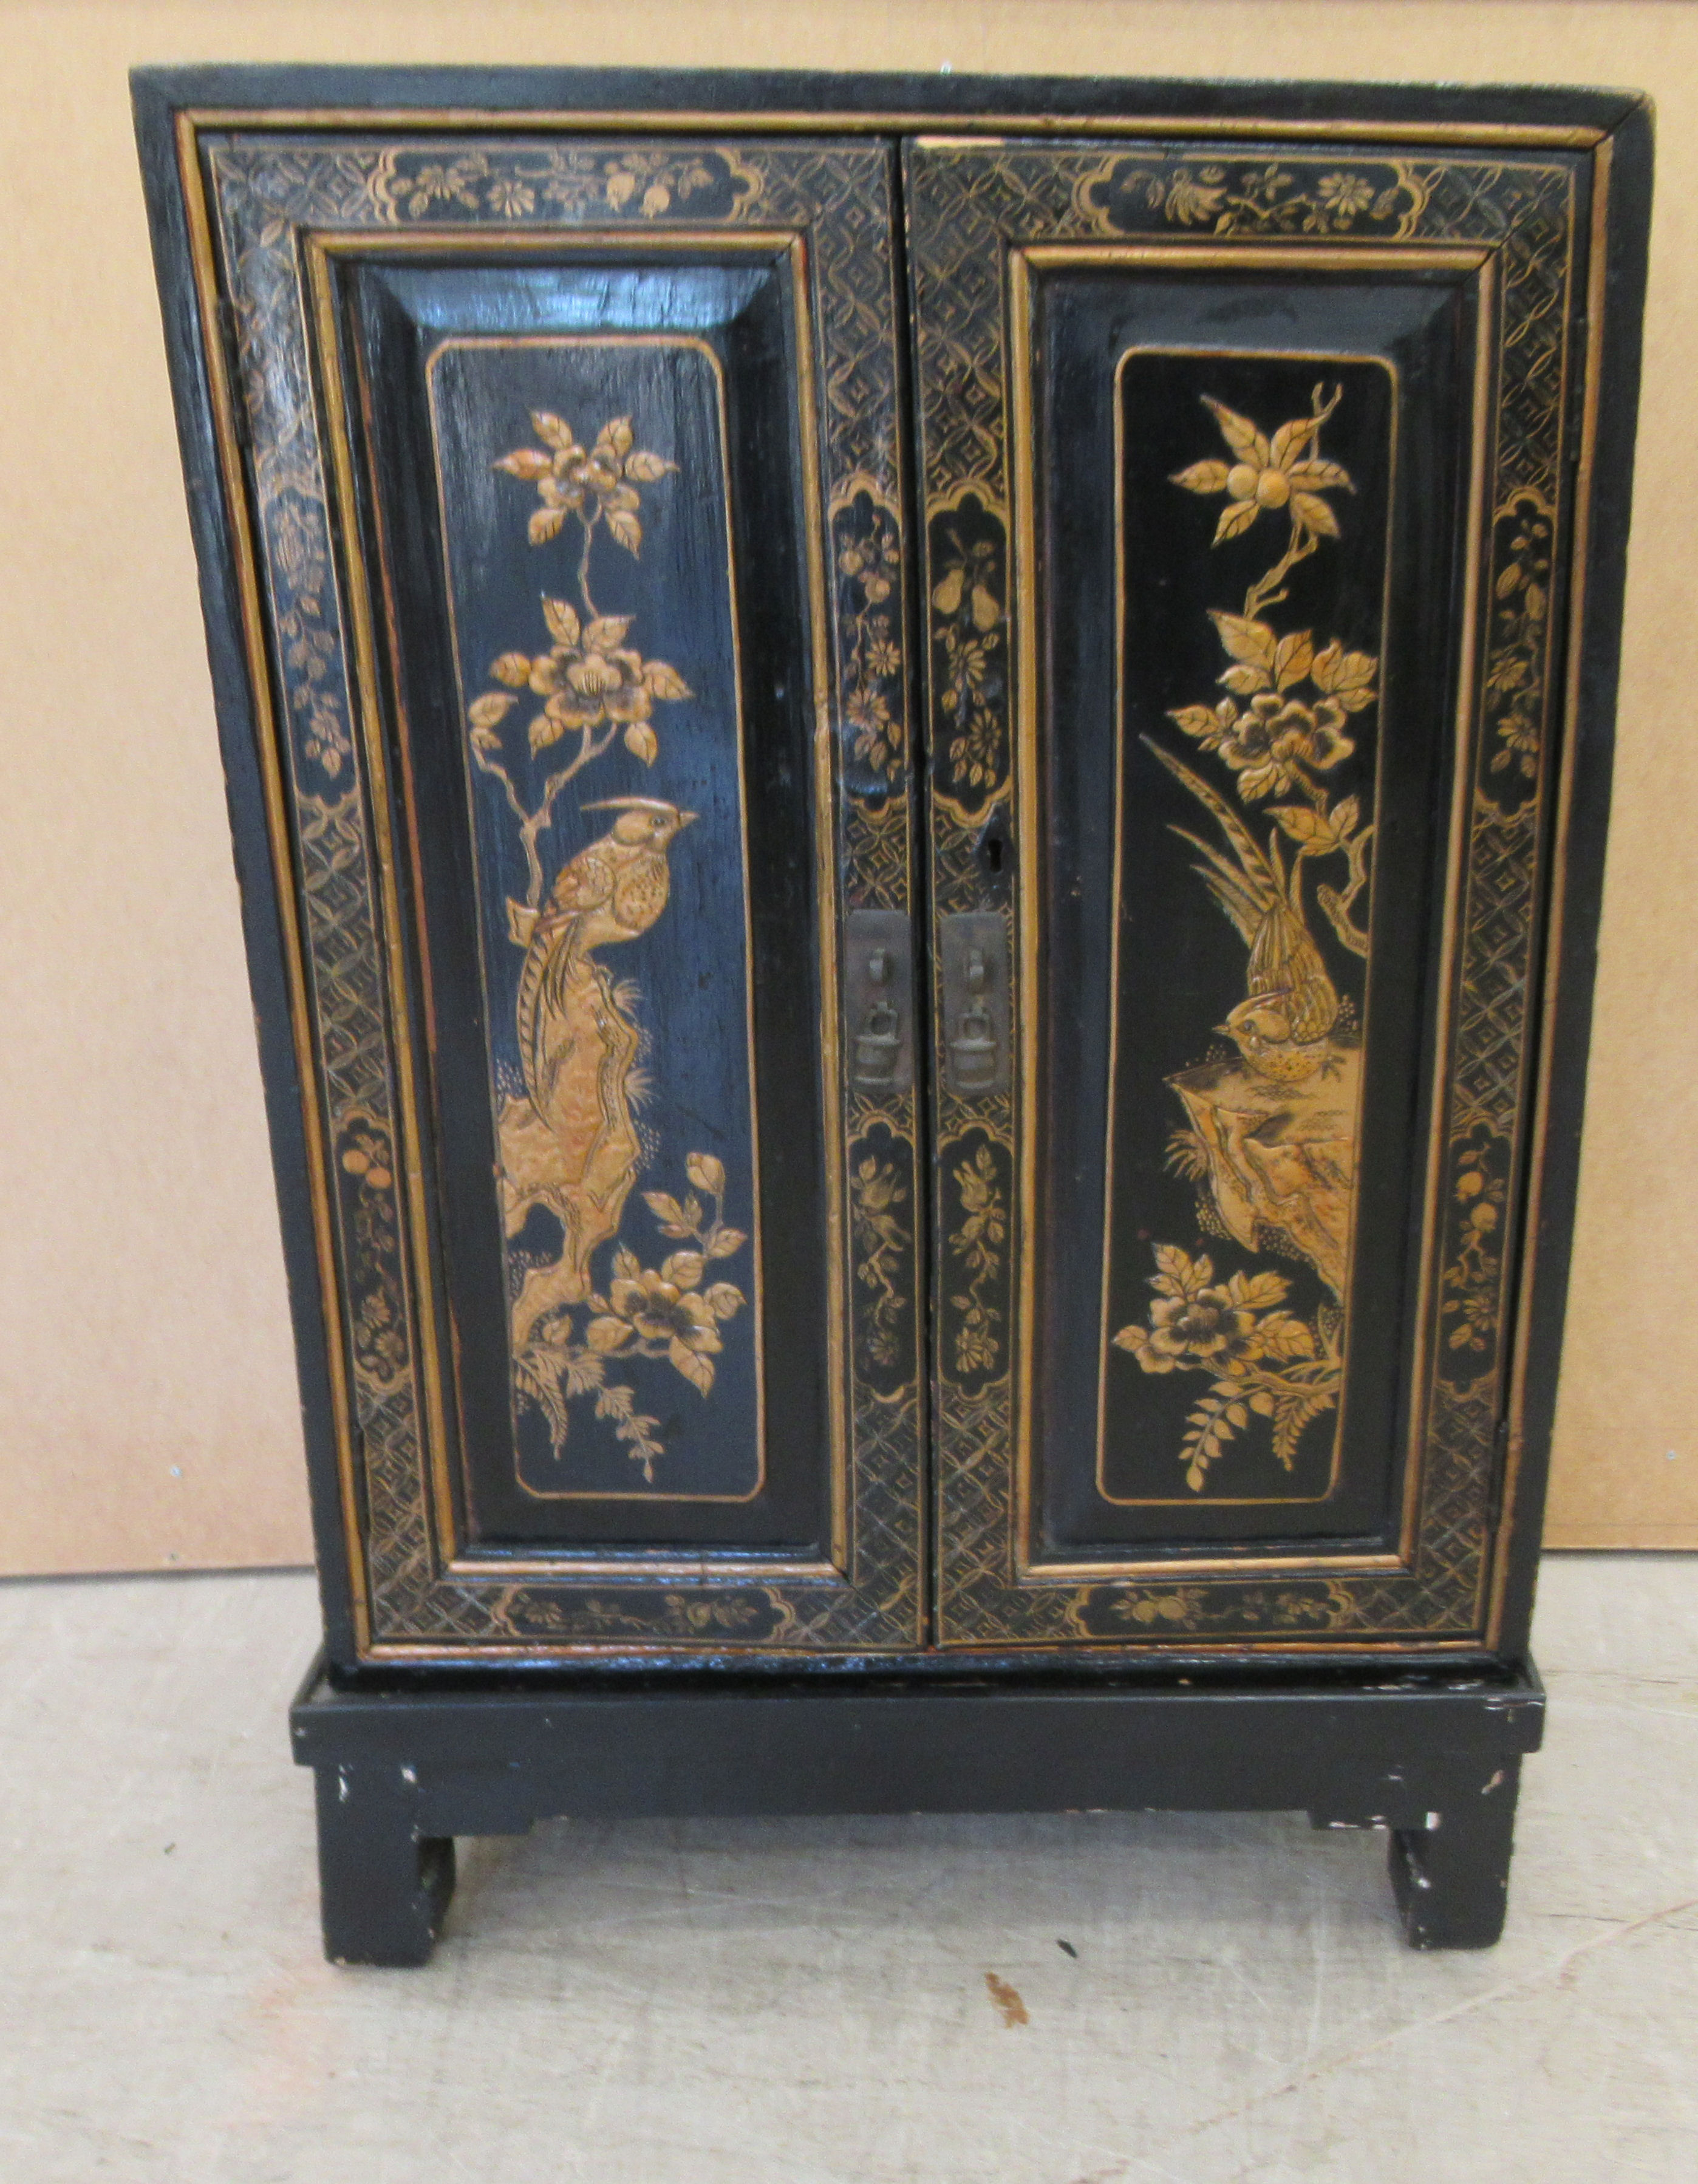 A 20thC Japanese black lacquered low cabinet on stand, decorated with birds and foliage  32"h  21"w